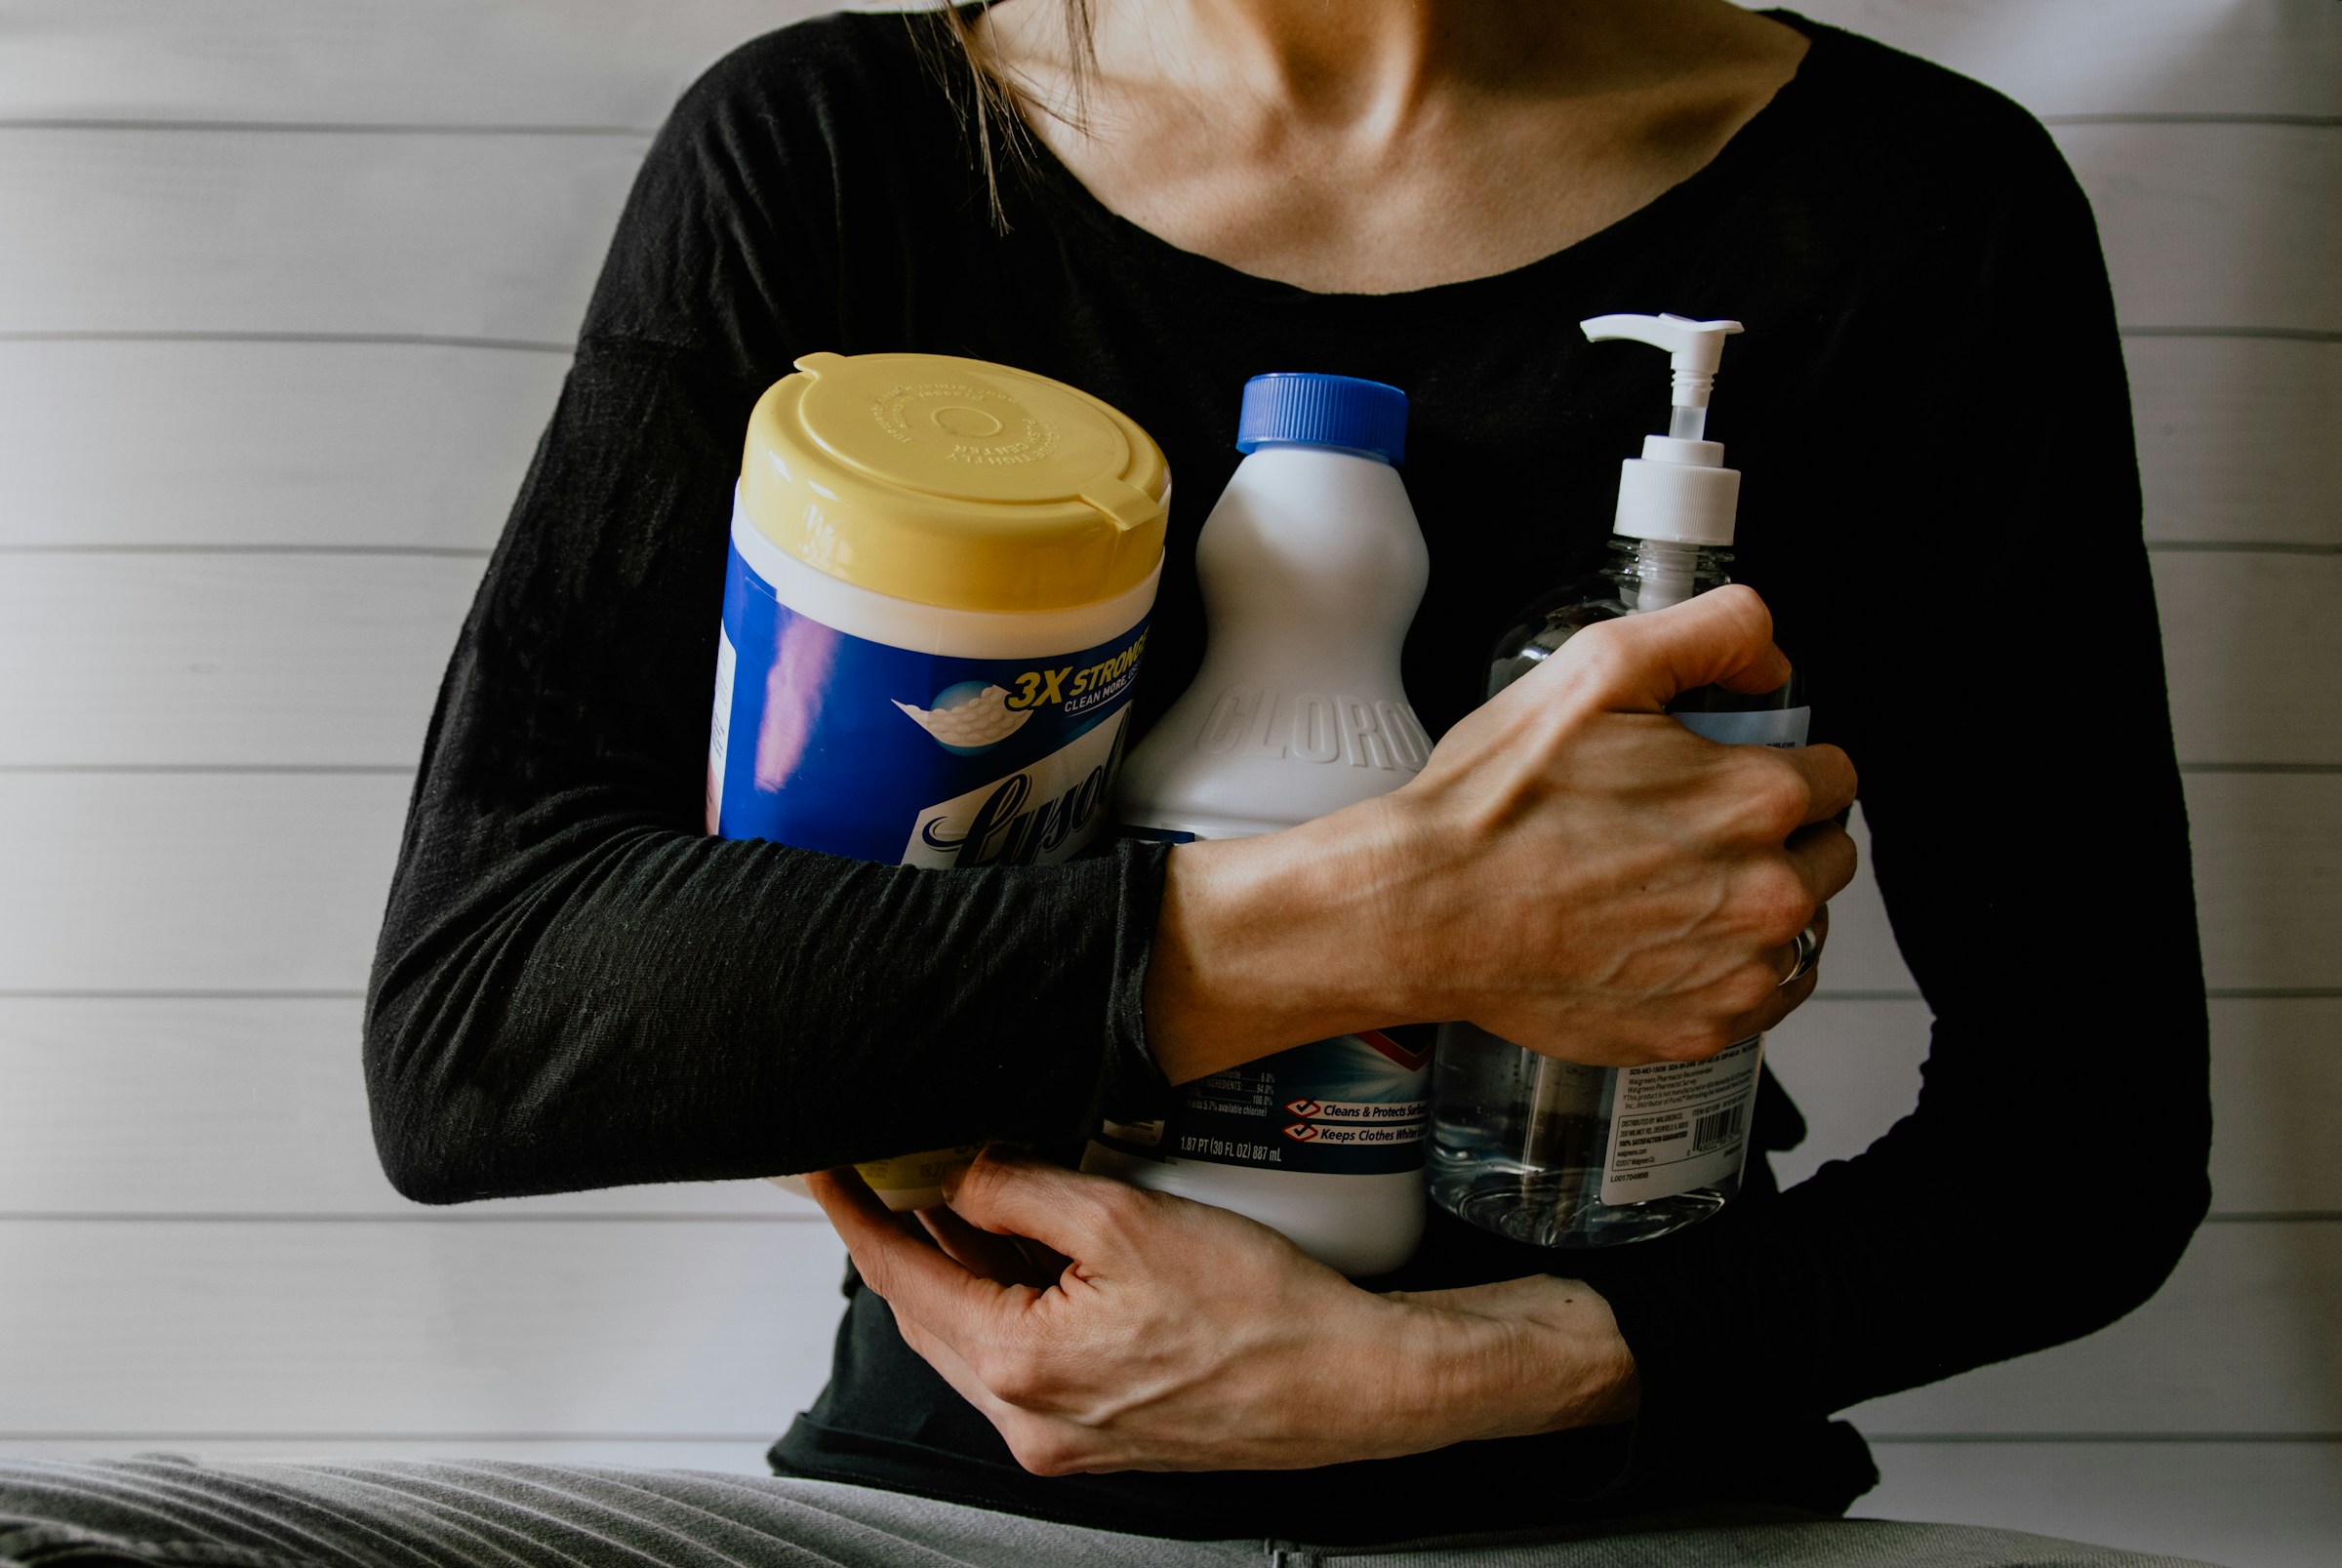 A person holding cleaning supplies | Source: Pexels